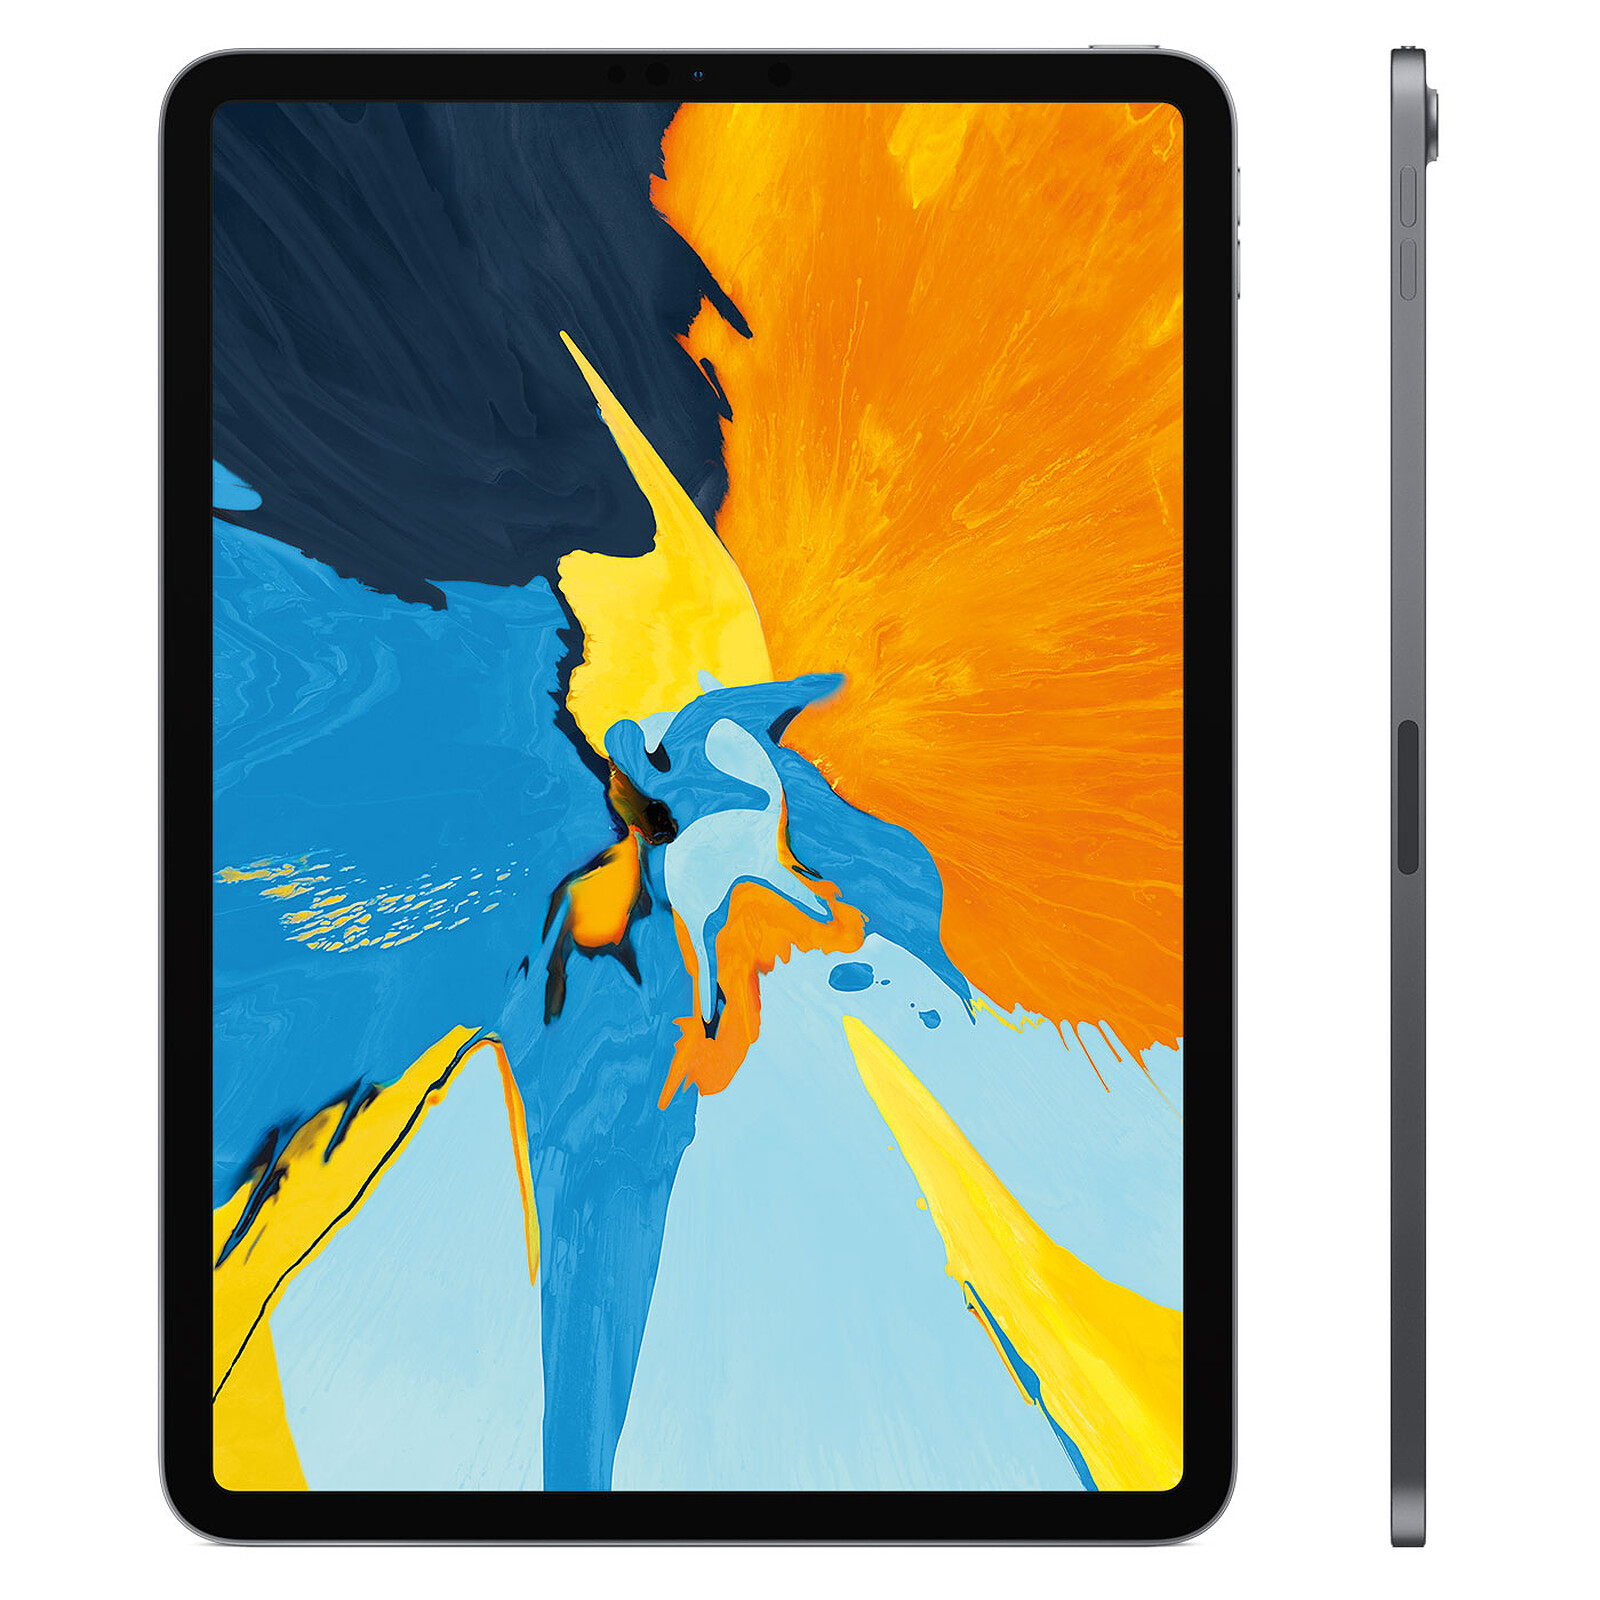 Apple iPad Pro (2018) 11-inch 1TB Wi-Fi Space Grey - Tablet computer Apple  on LDLC | Holy Moley